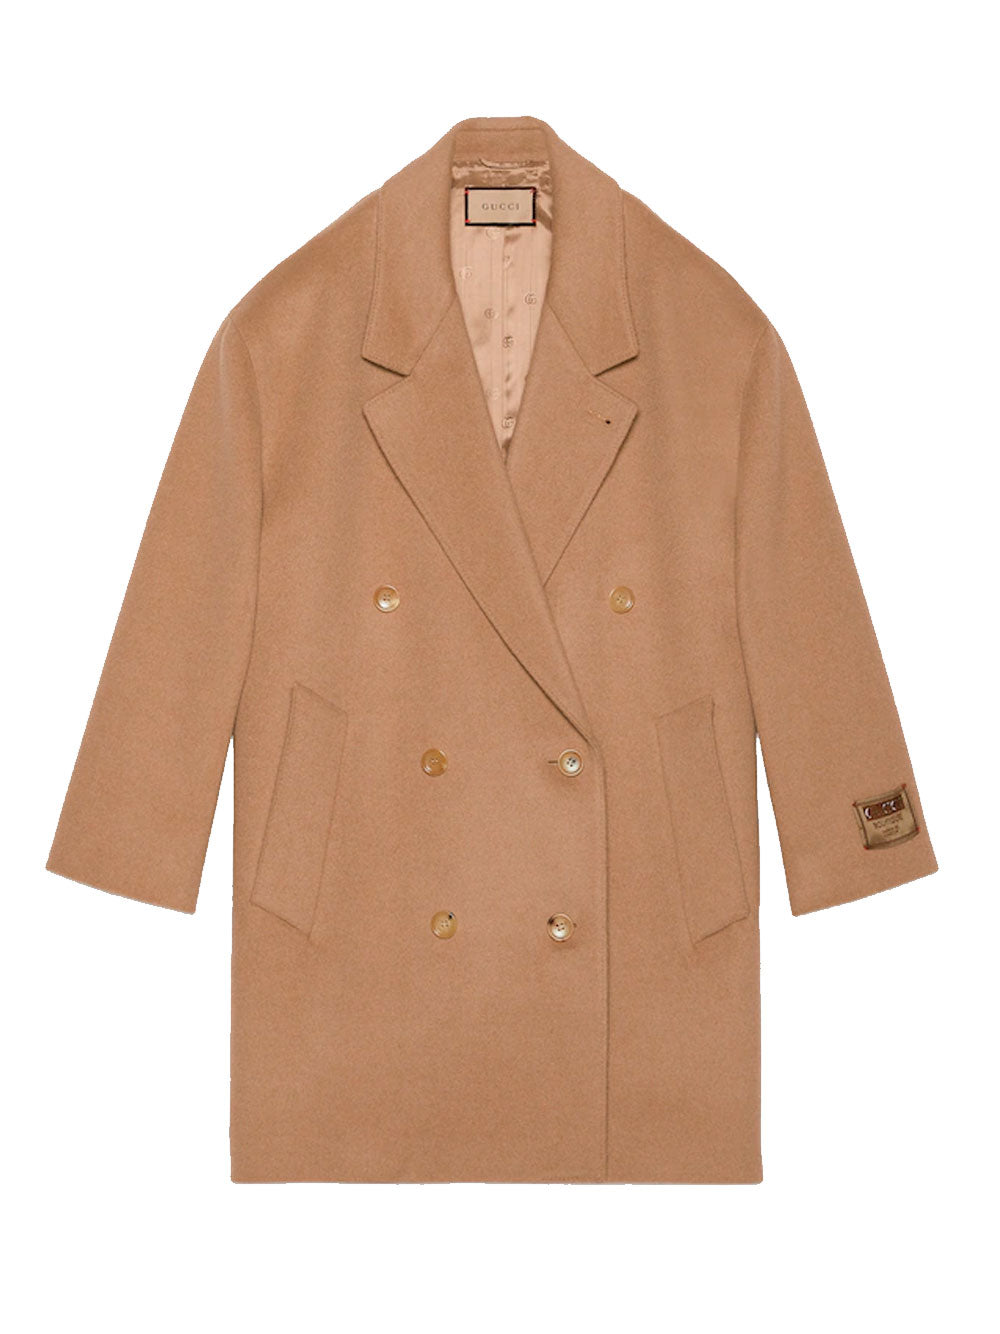 Camel coat with embroidered label